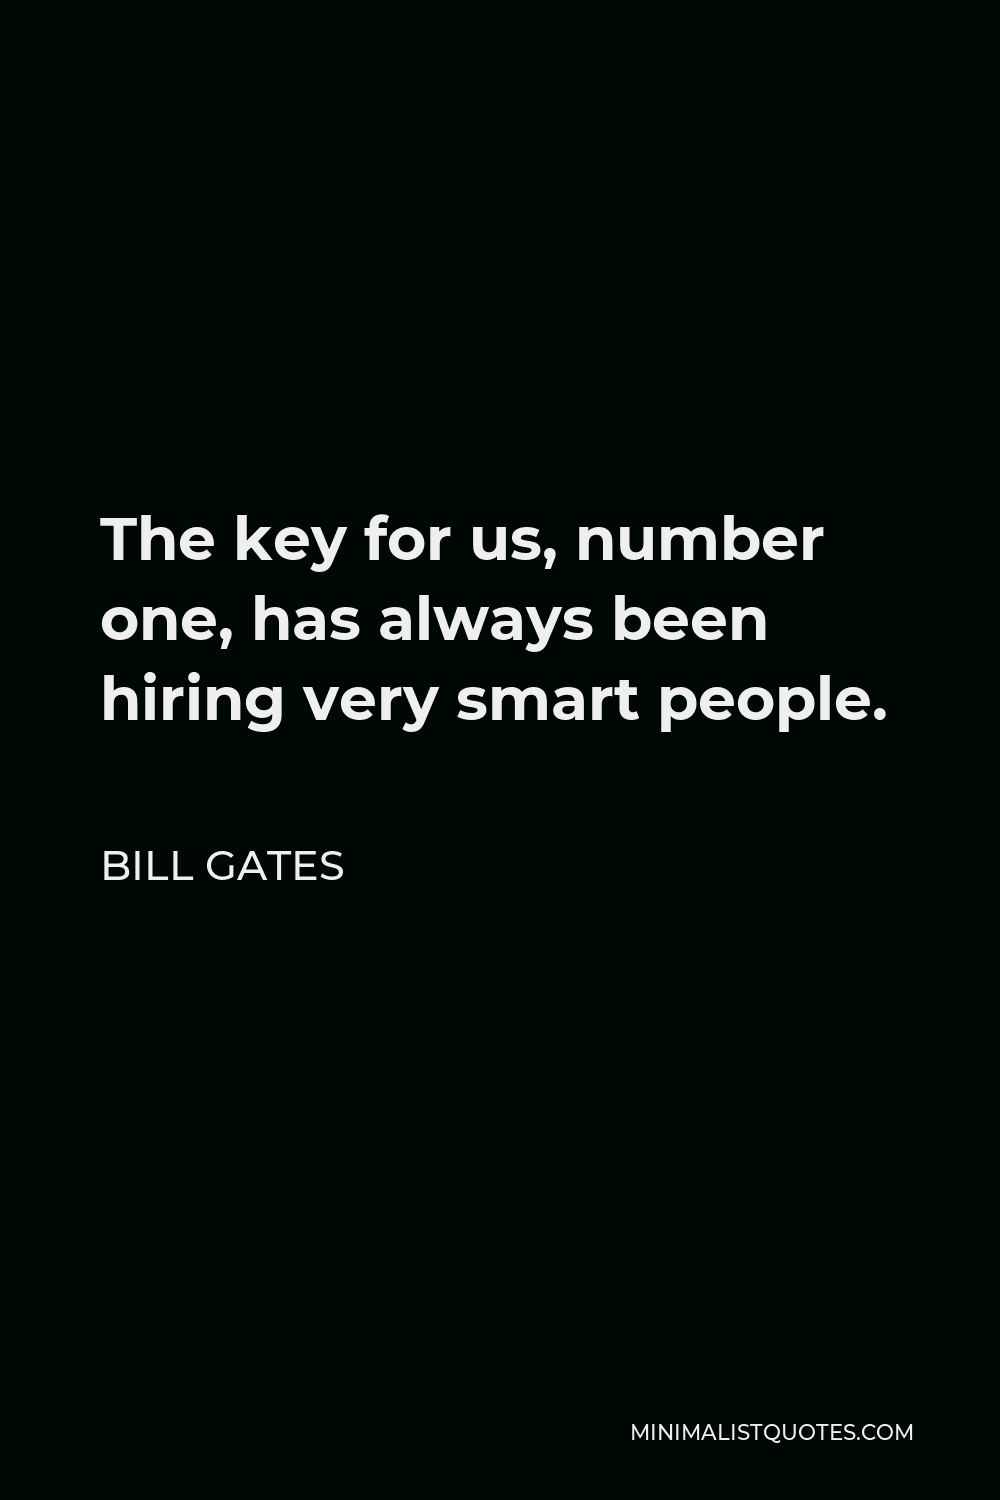 Bill Gates Quote - The key for us, number one, has always been hiring very smart people.